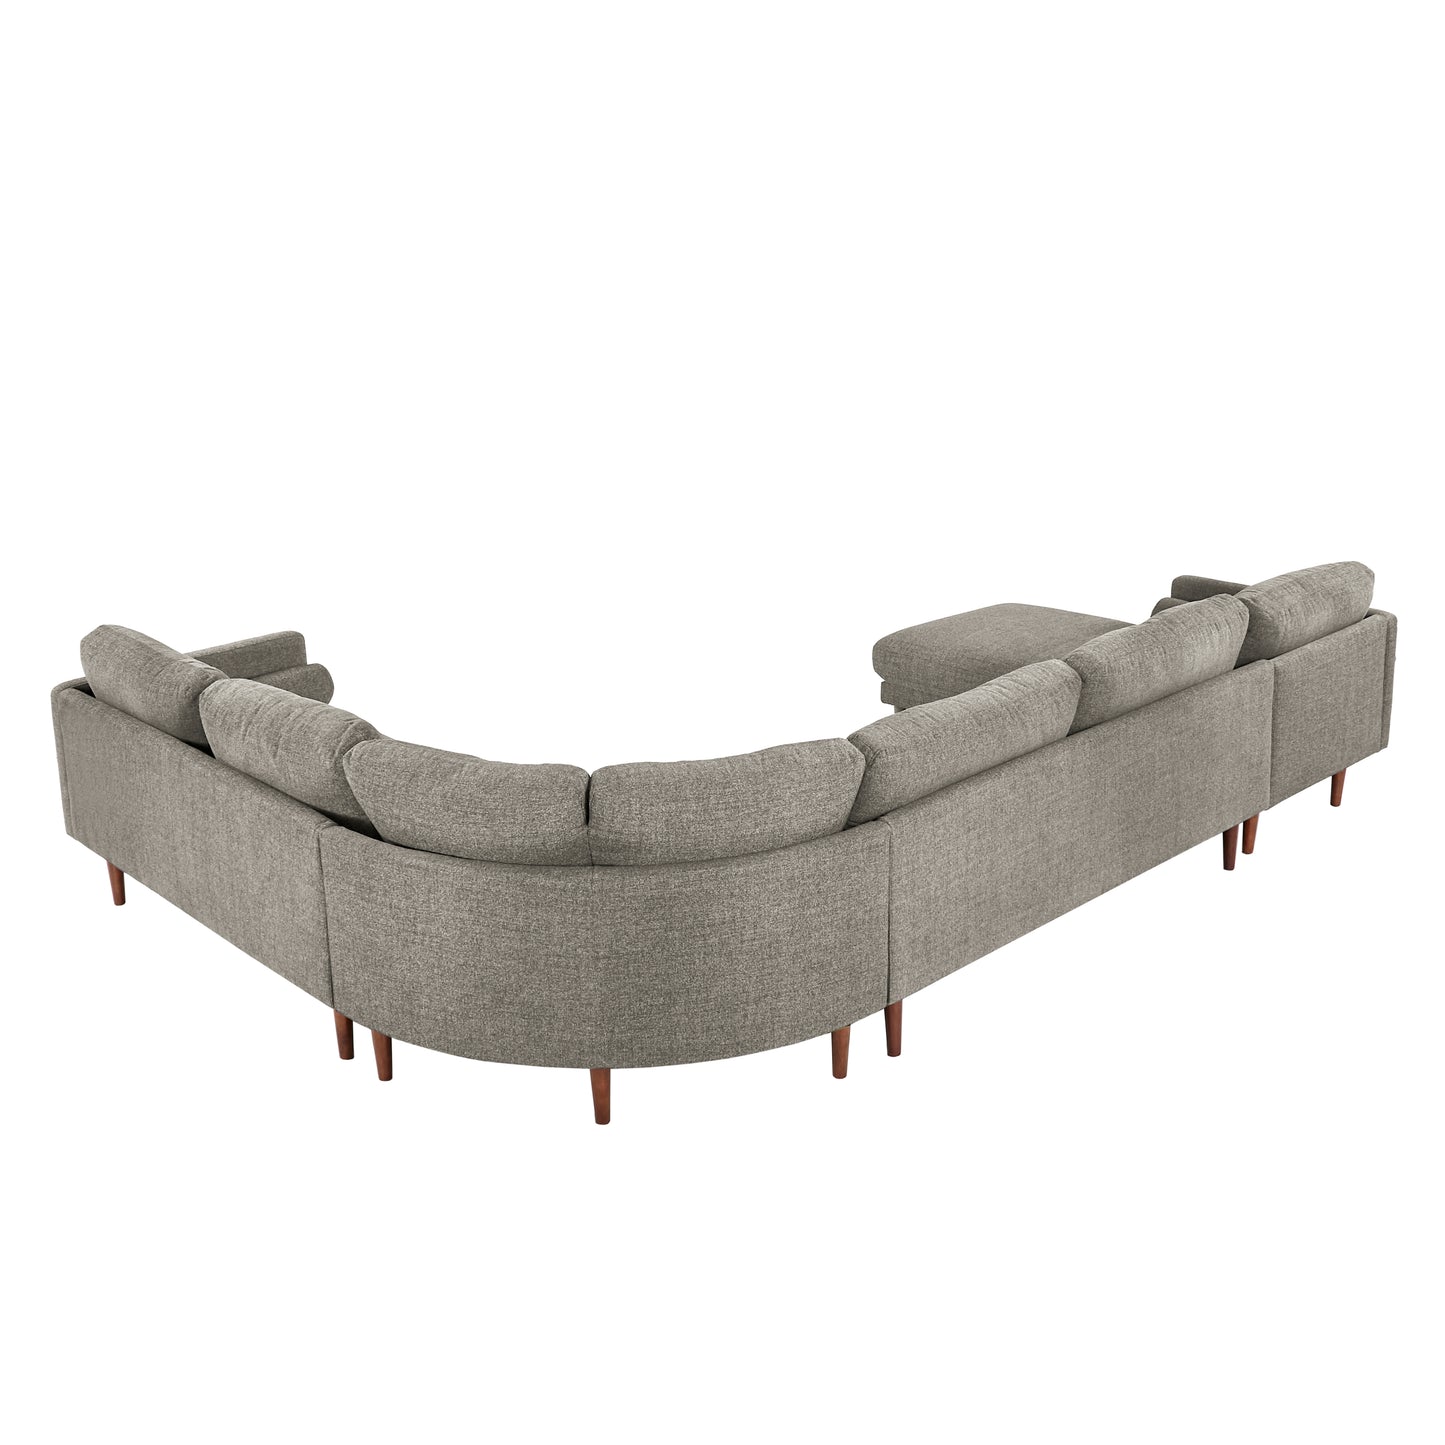 Mid-Century Upholstered Sectional Sofa - Light Grey, 7-Seat, U-Shape Sectional with Left-Facing Chaise